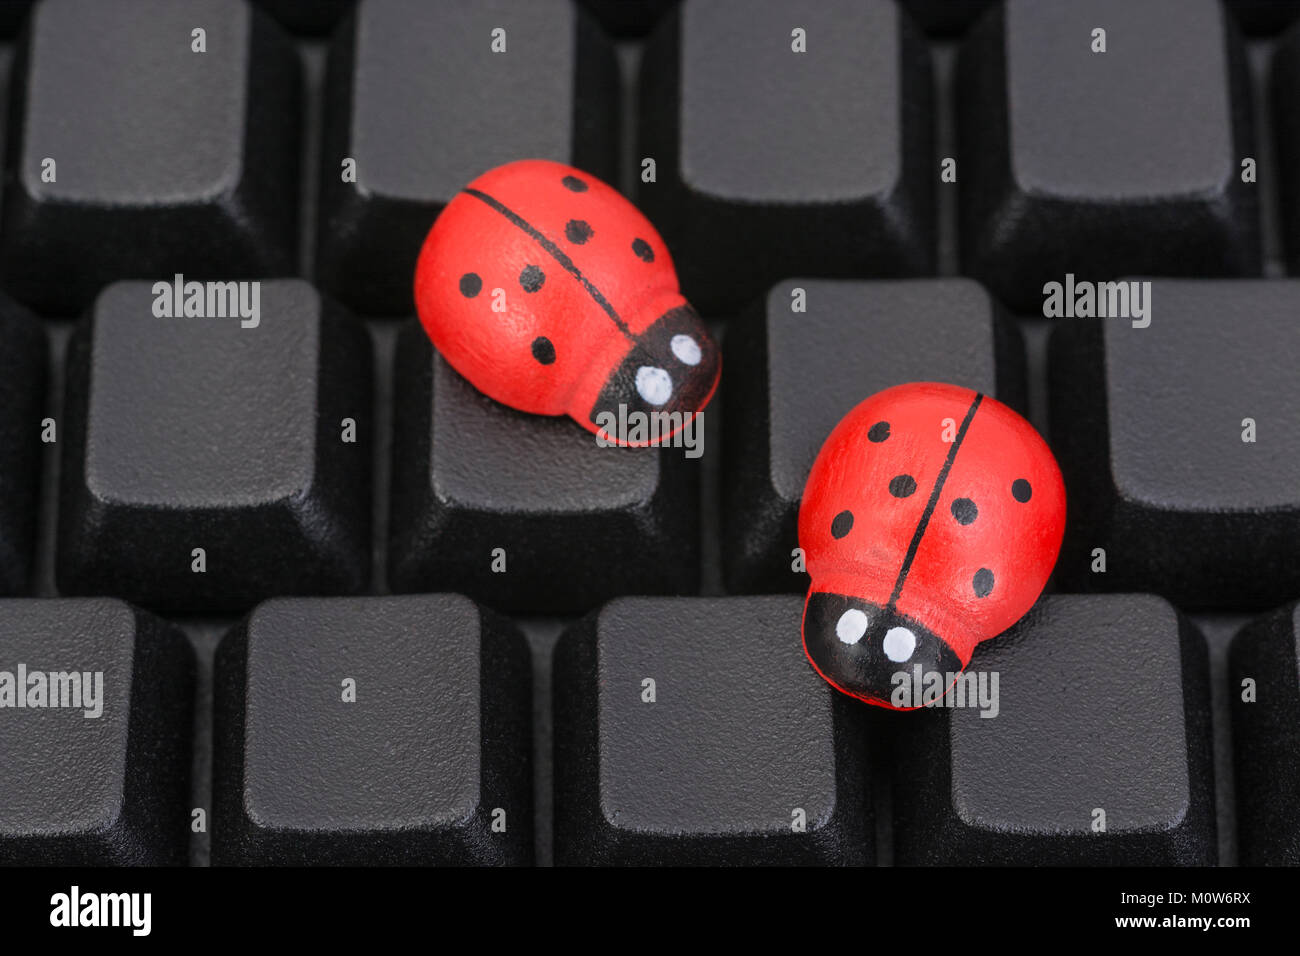 Small toy ladybird - as visual metaphor for concept of computer bugs, software bugs, hardware bugs, computer viruses. Stock Photo